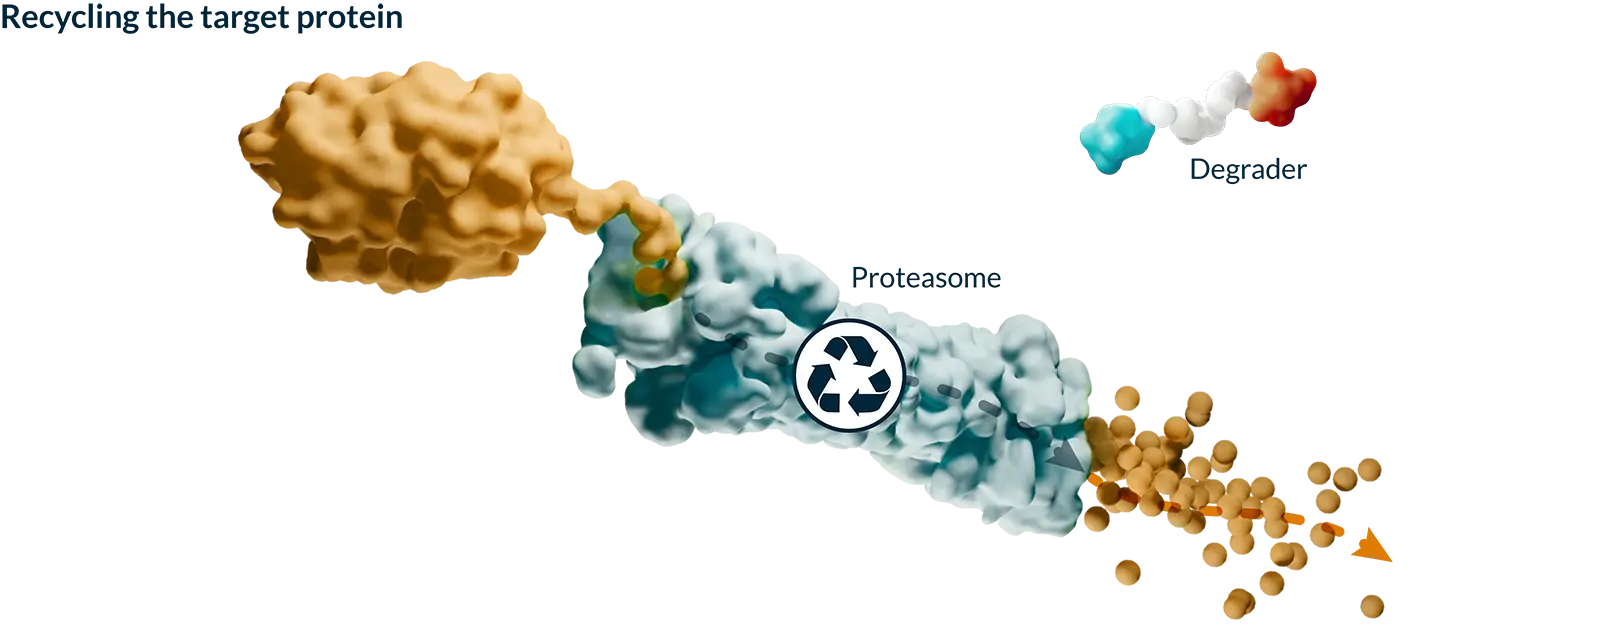 Step 4 of 4: Kymera’s tri-colored heterobifunctional degrader molecule transports the disease-causing protein to a proteasome for recycling.